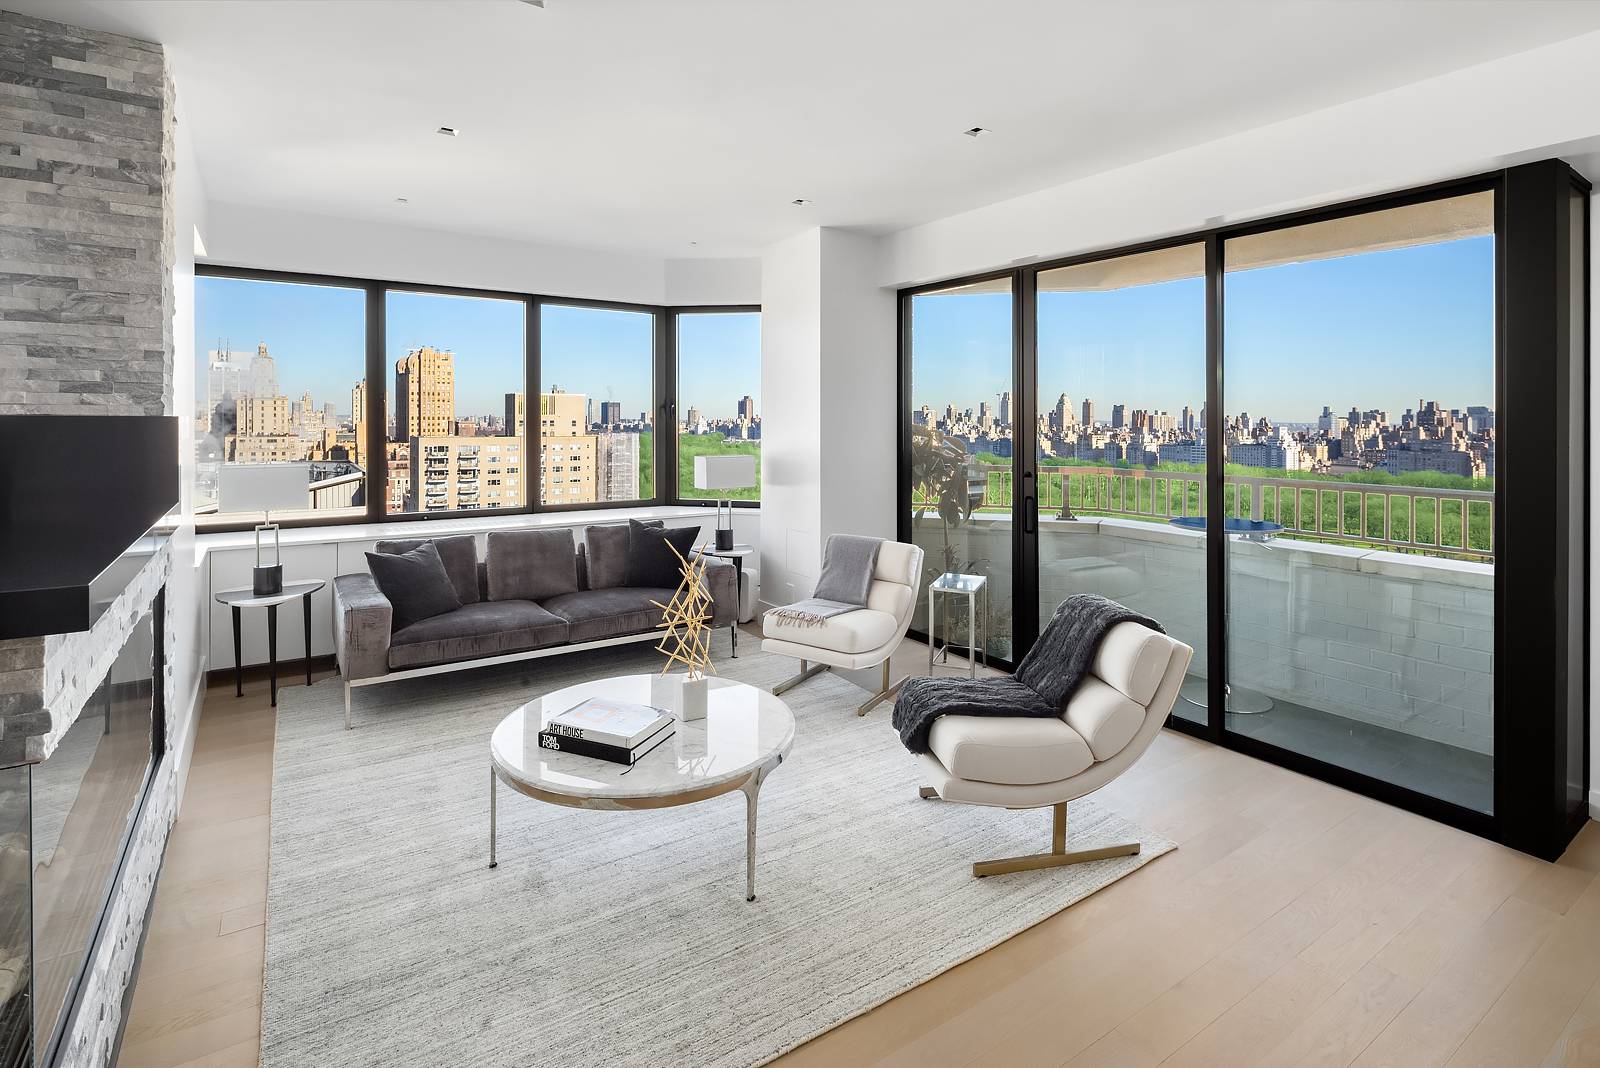 Luxury Sky Penthouse Overlooking Sheep Meadow Welcome to this gut renovated sky penthouse occupying the top two floors of The Europa, a one of a kind 4 bedroom, 4 bathroom ...